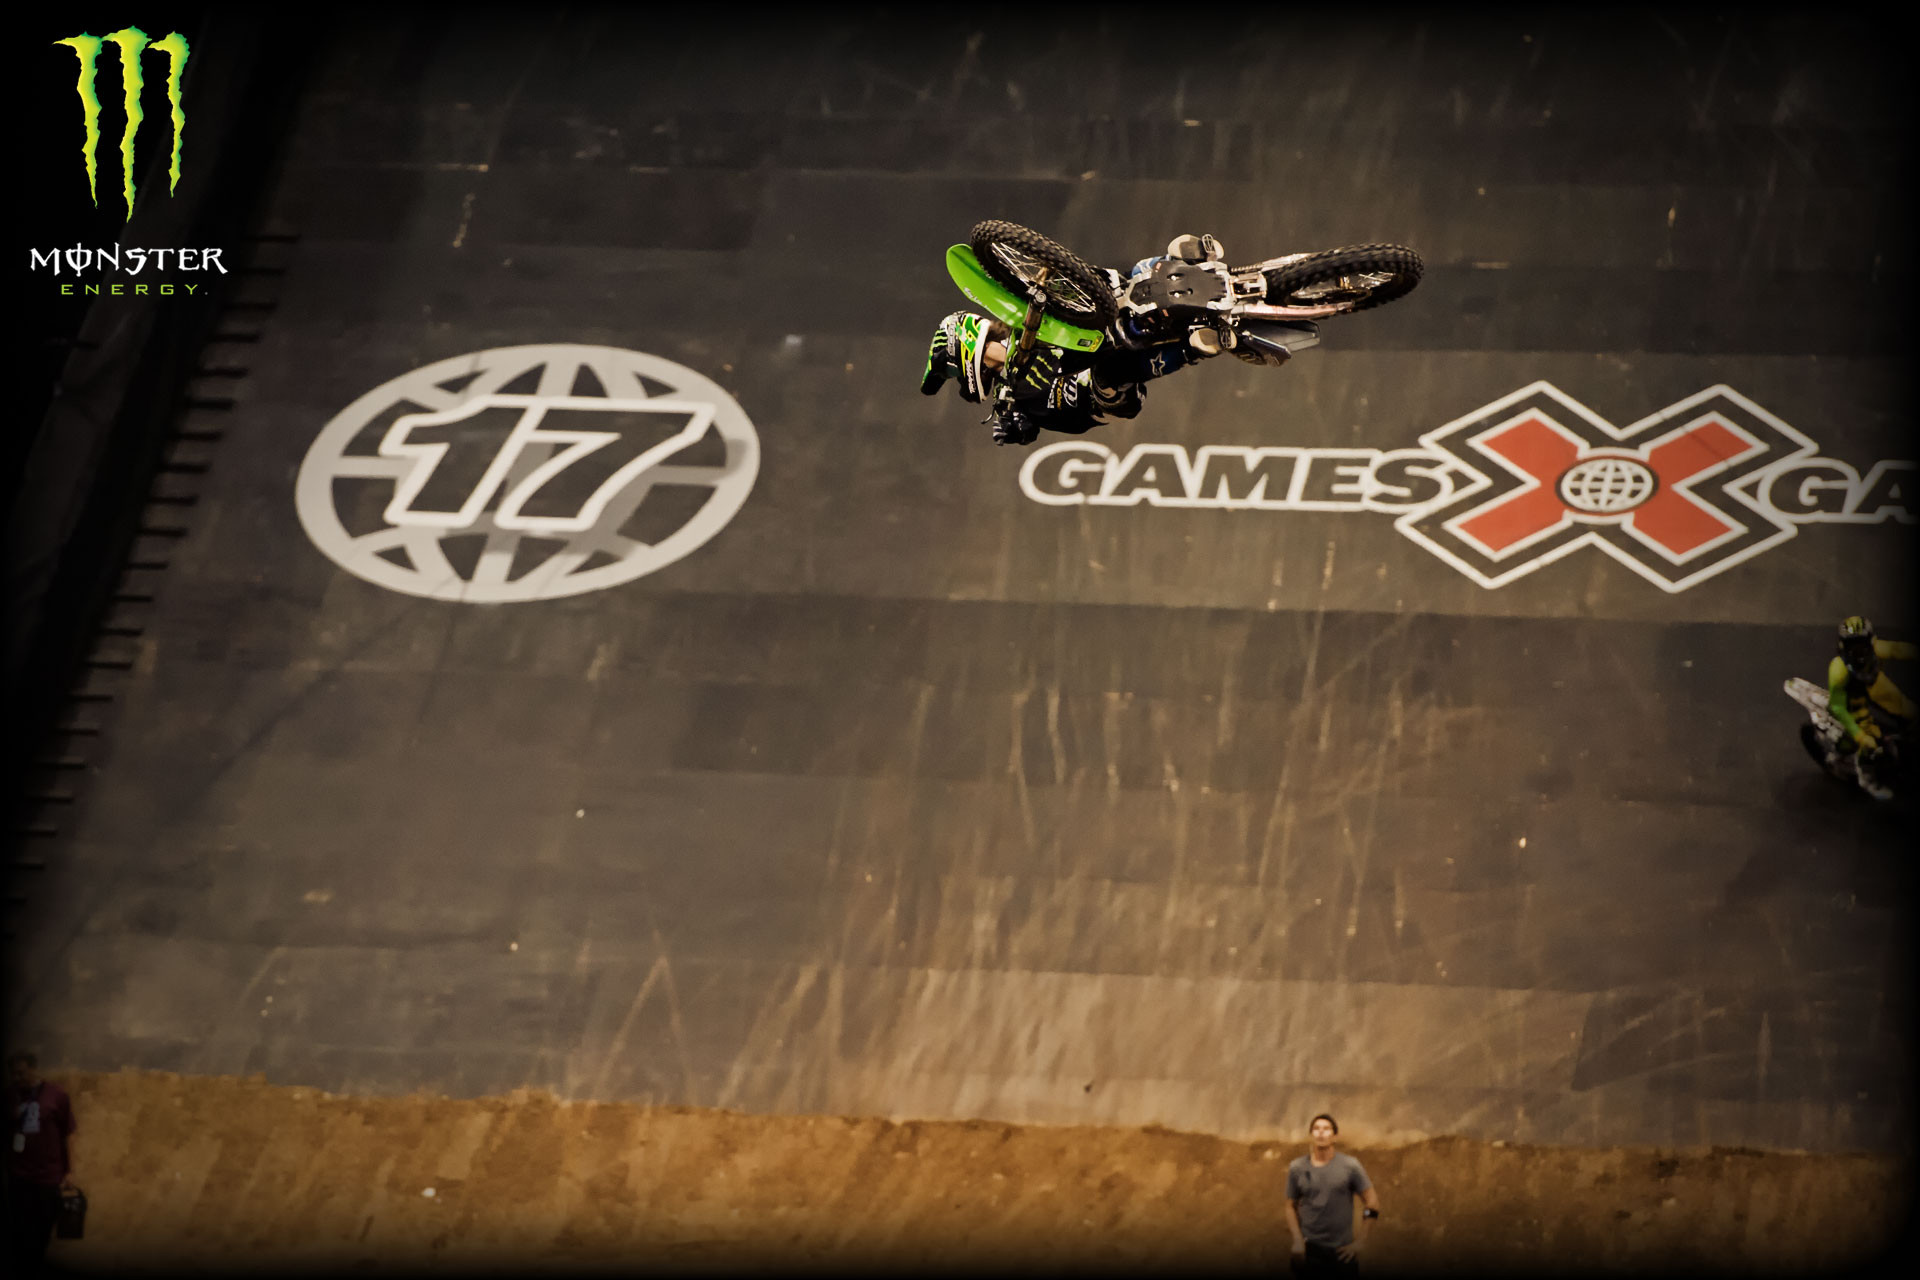 1920x1280 Take a look at these cool Monster Energy wallpapers from the X Games.